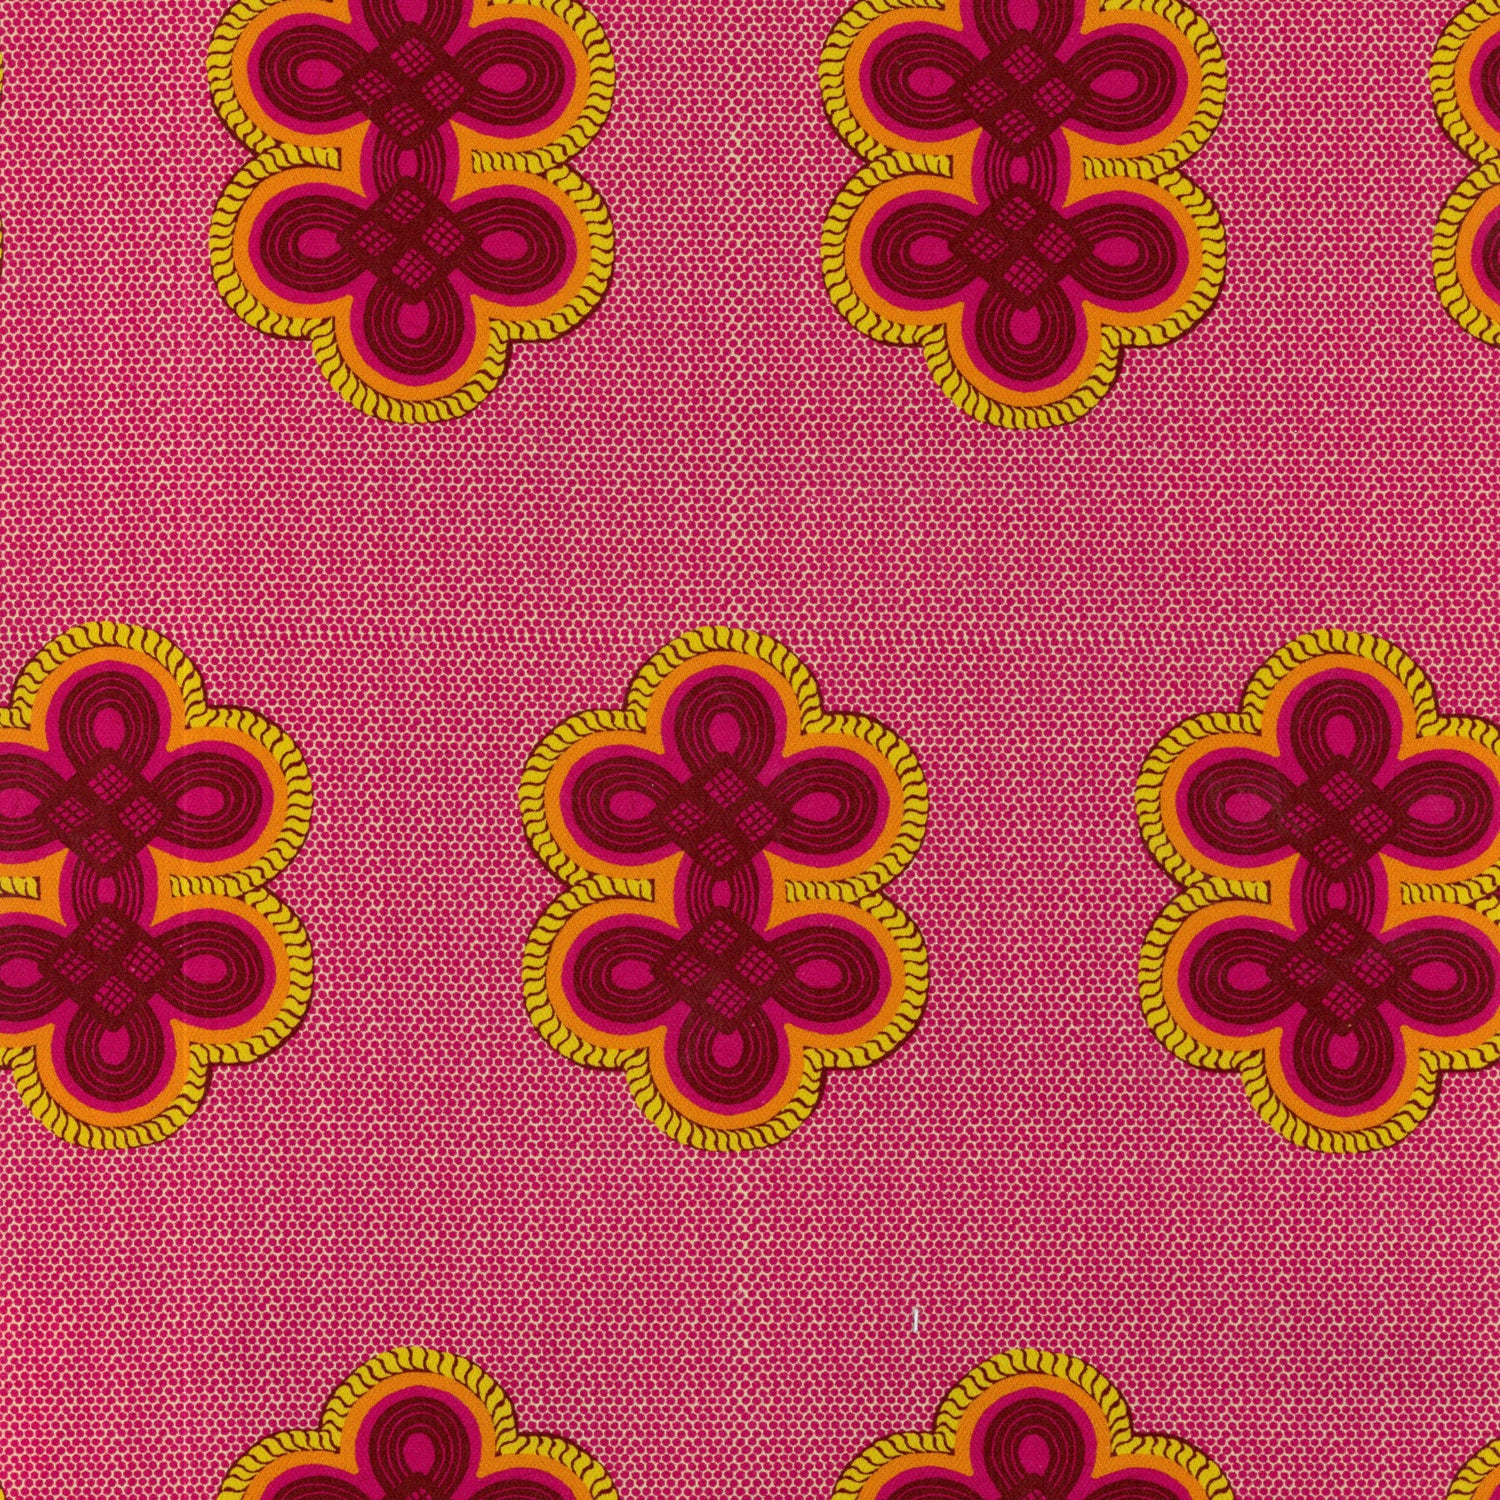 Detail of fabric in a repeating curvilinear knot print in pink and orange on a pink field.